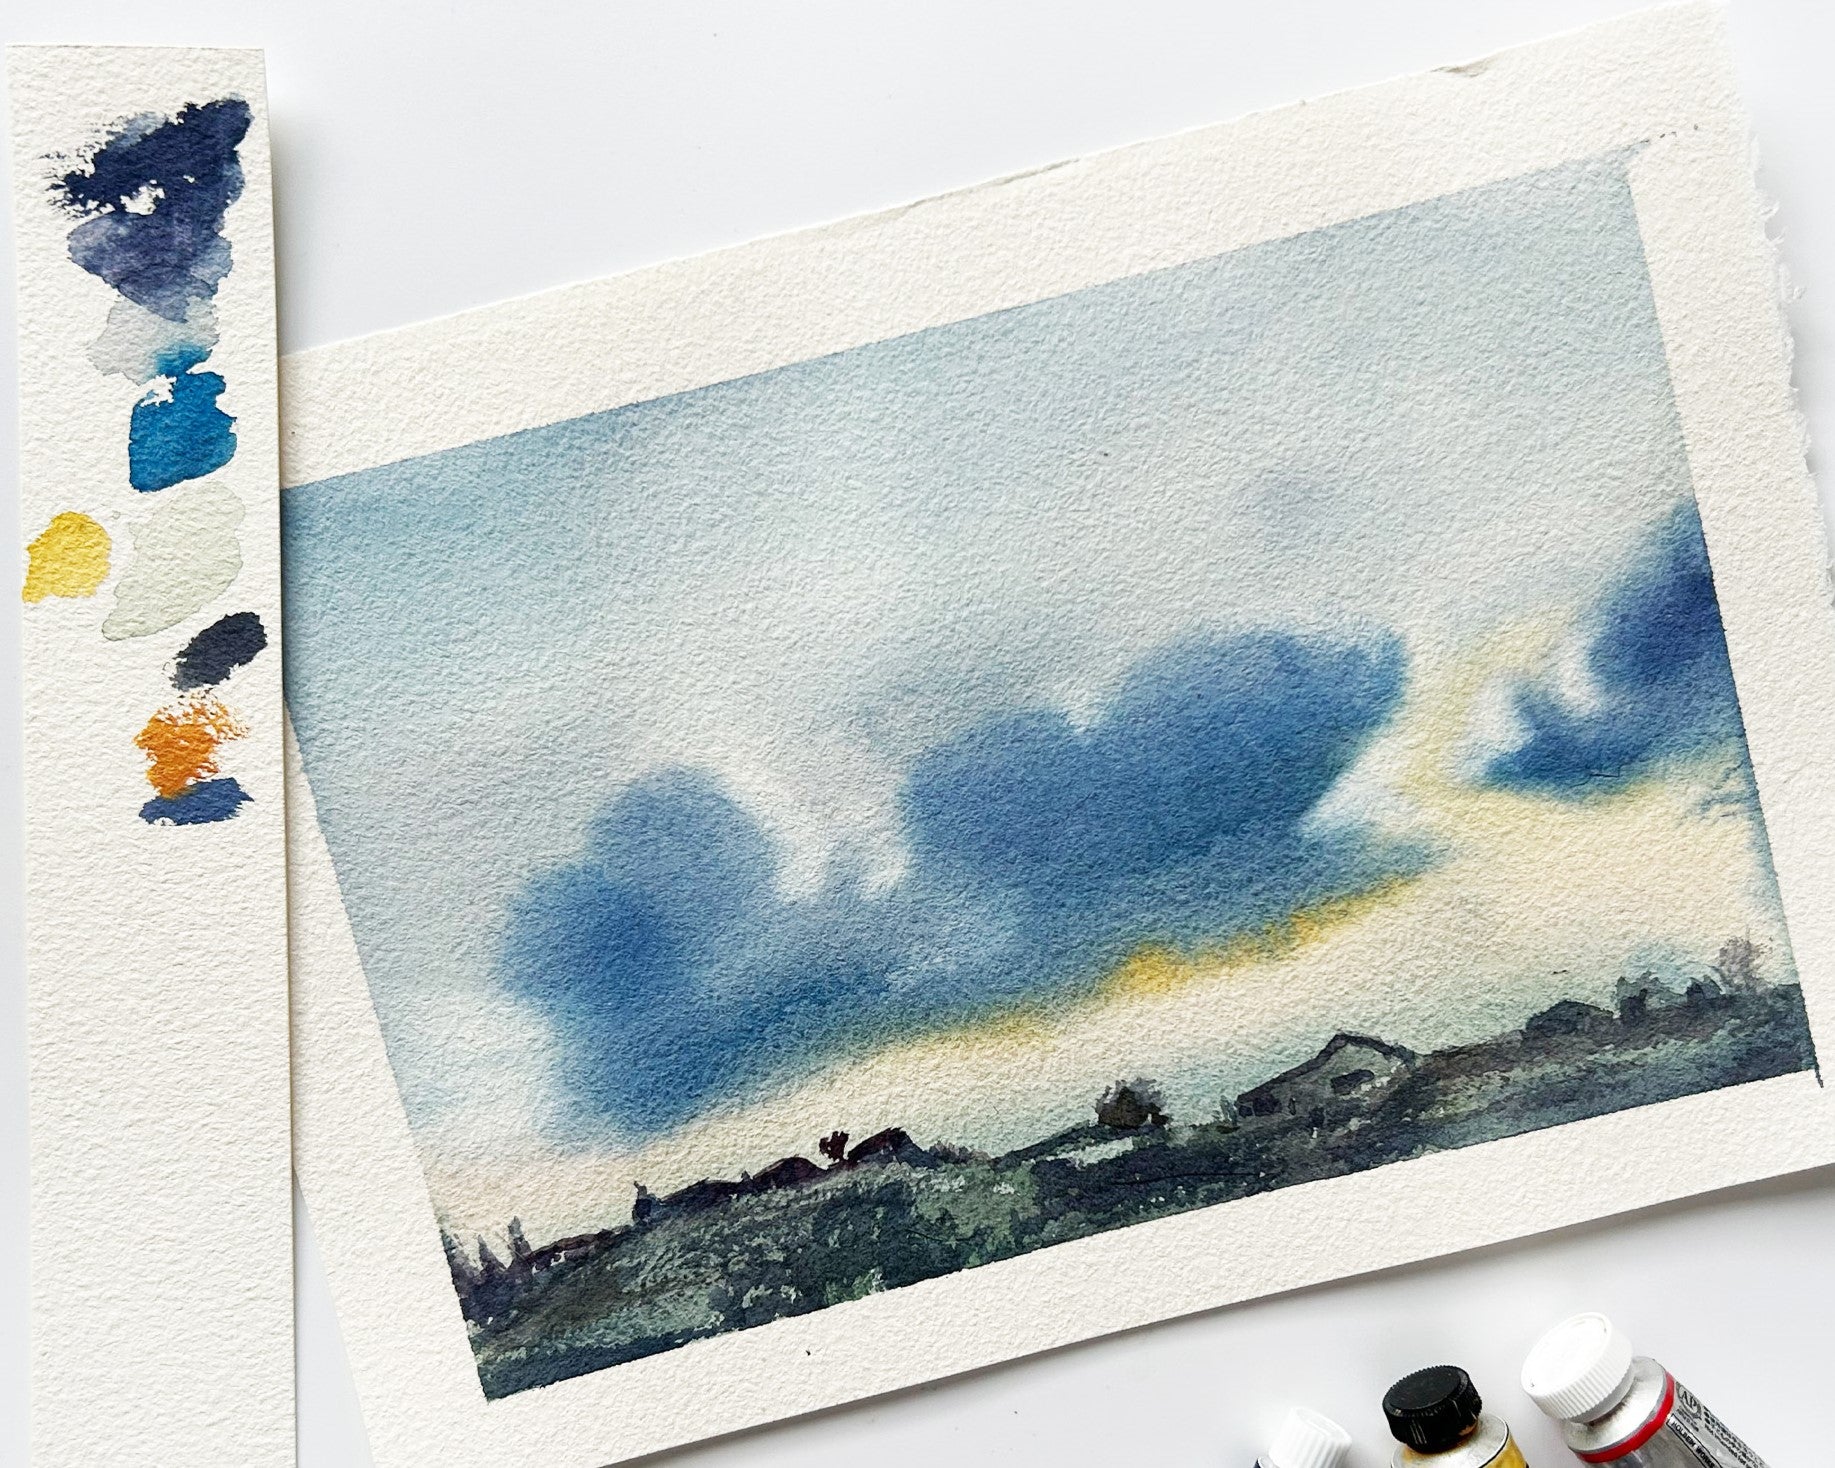 Watercolour landscape in muted blues and yellows